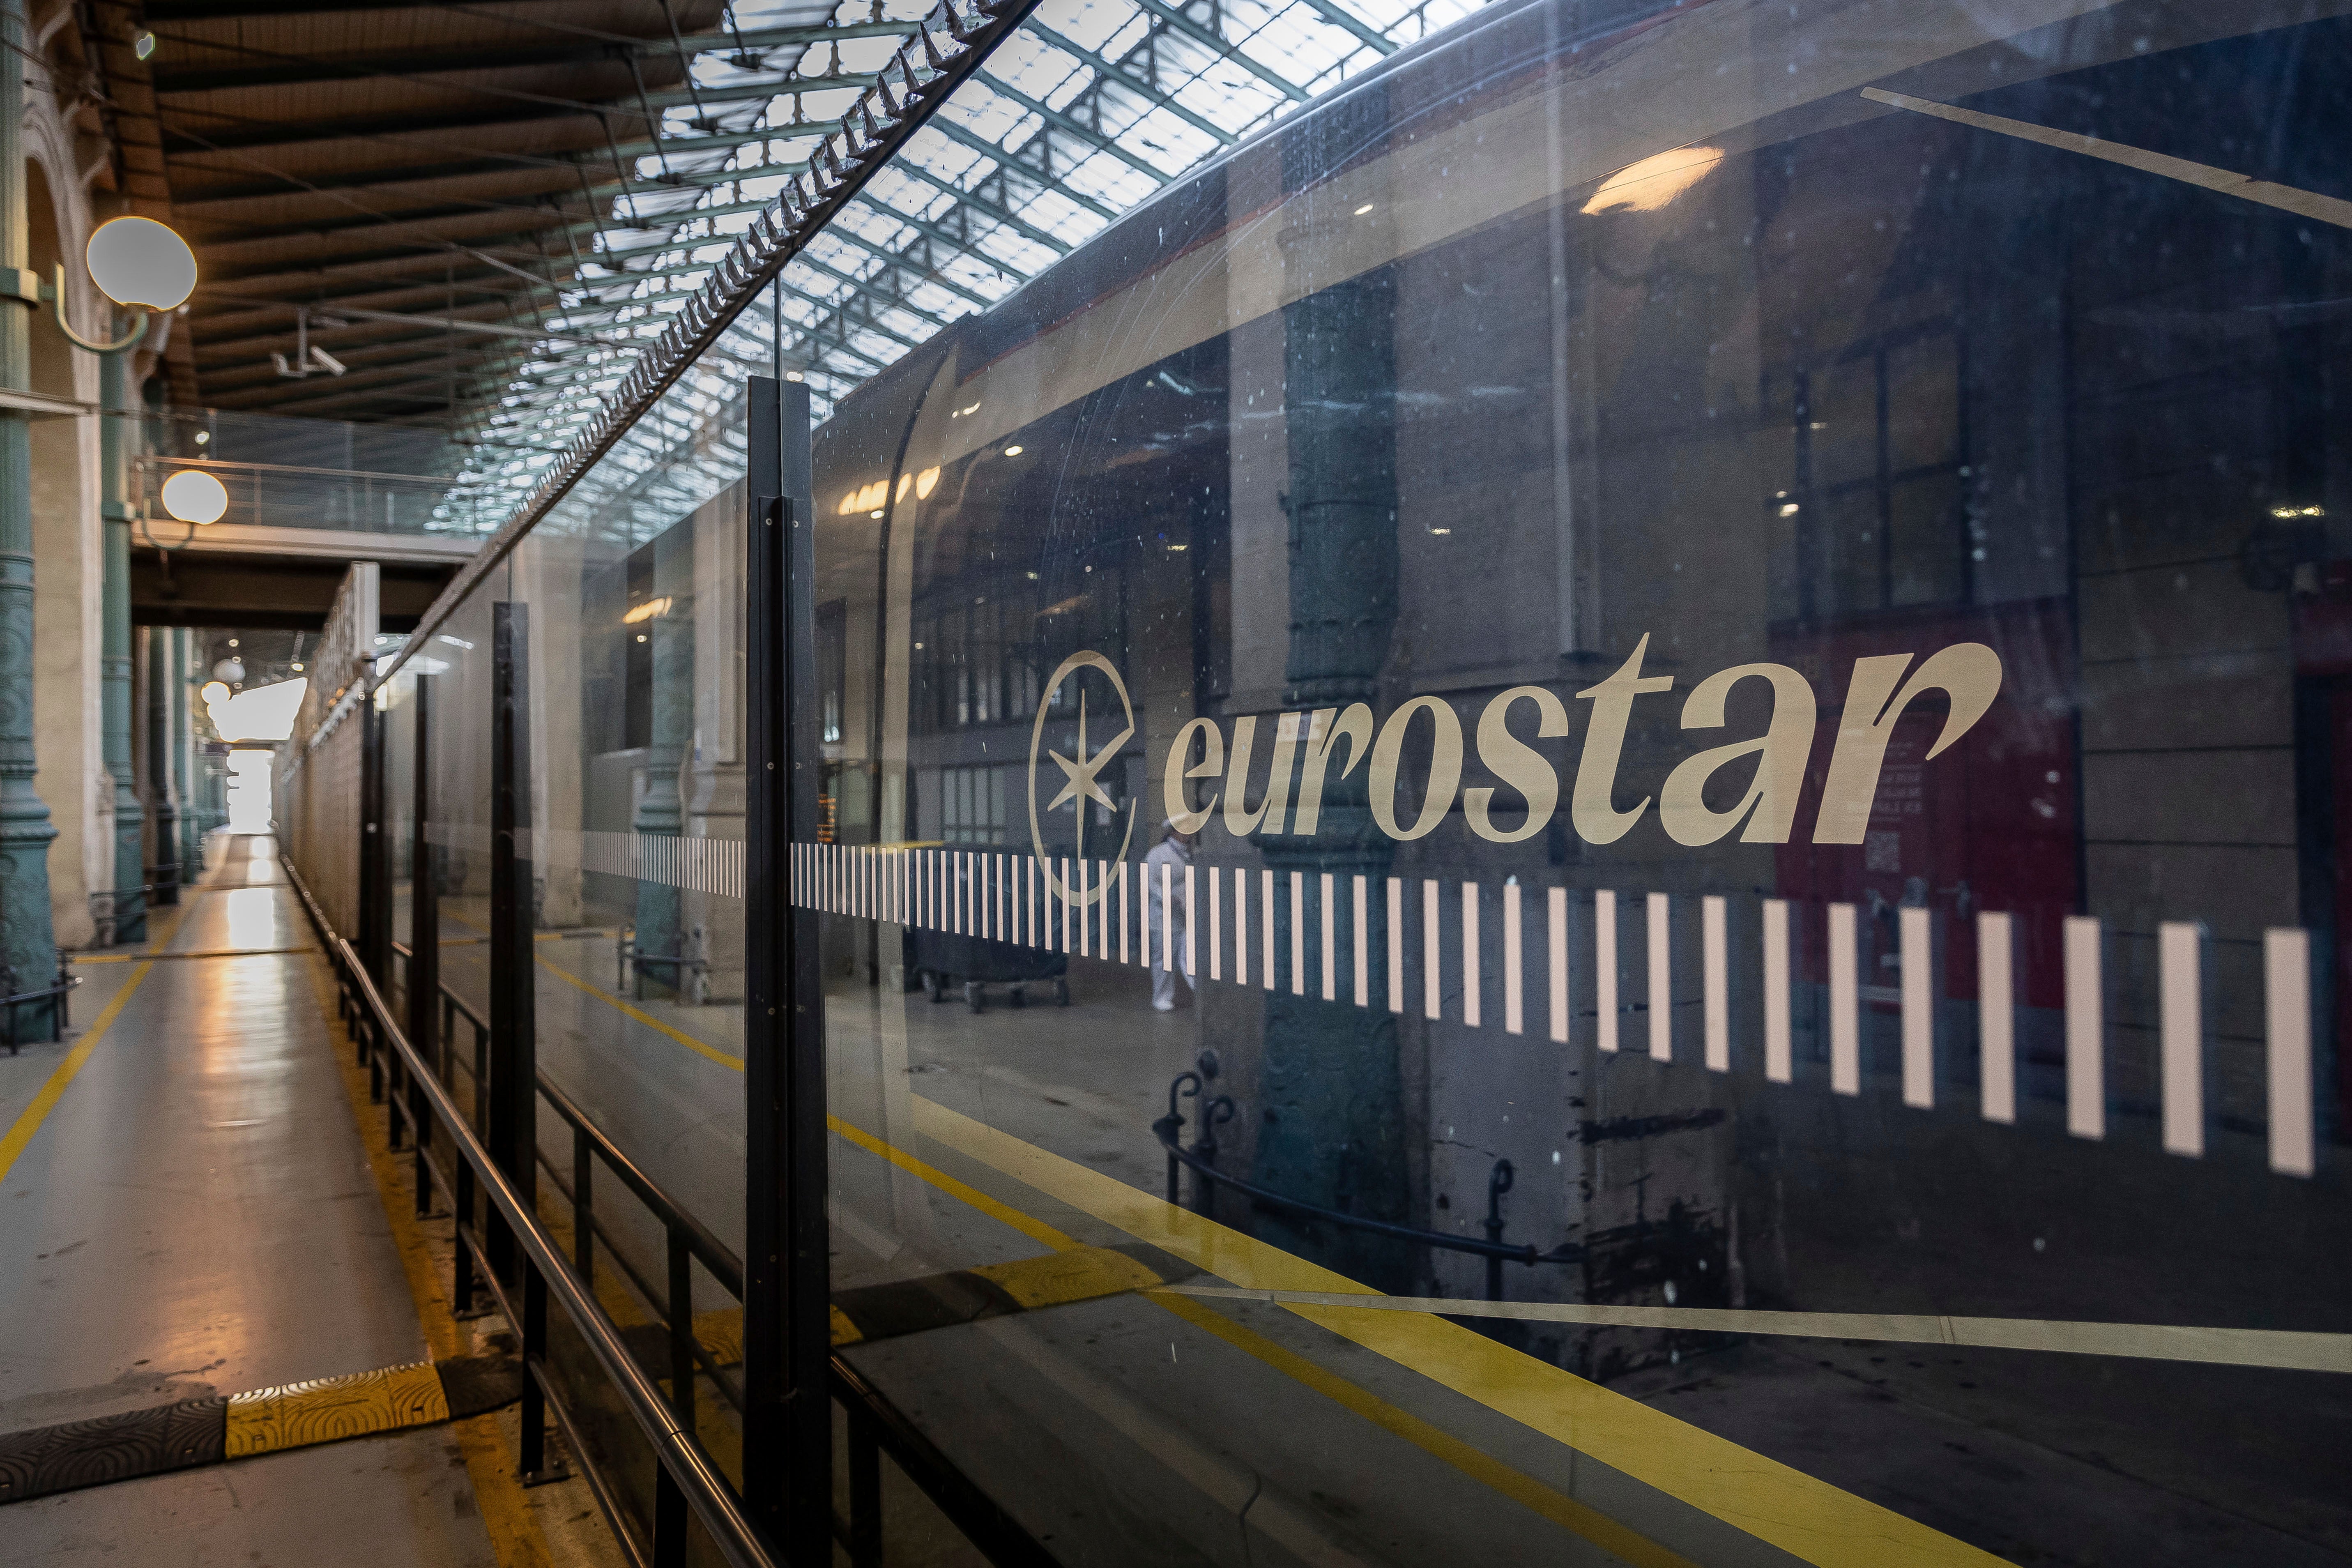 Eurostar urged passengers to check their website for refunds or exchanges